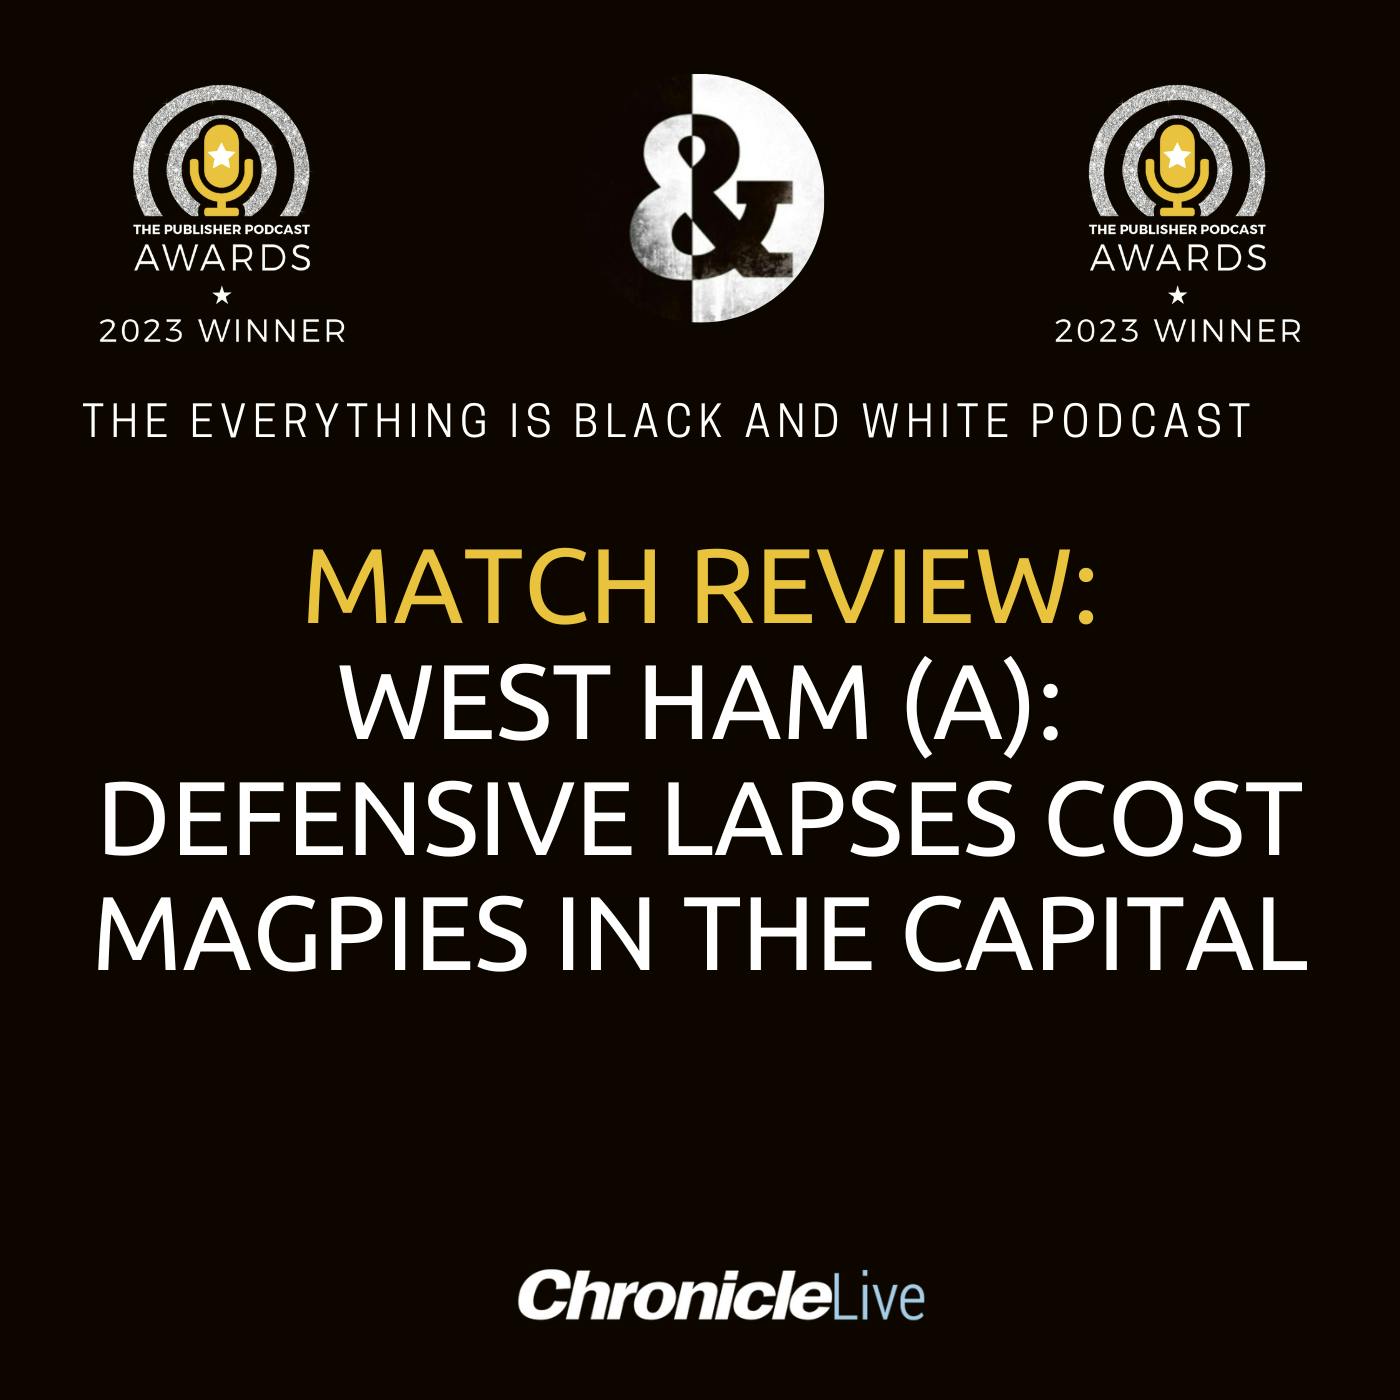 WEST HAM 2-2 NEWCASTLE UNITED |  DEFENSIVE LAPSES COST MAGPIES VICTORY IN THE CAPITAL